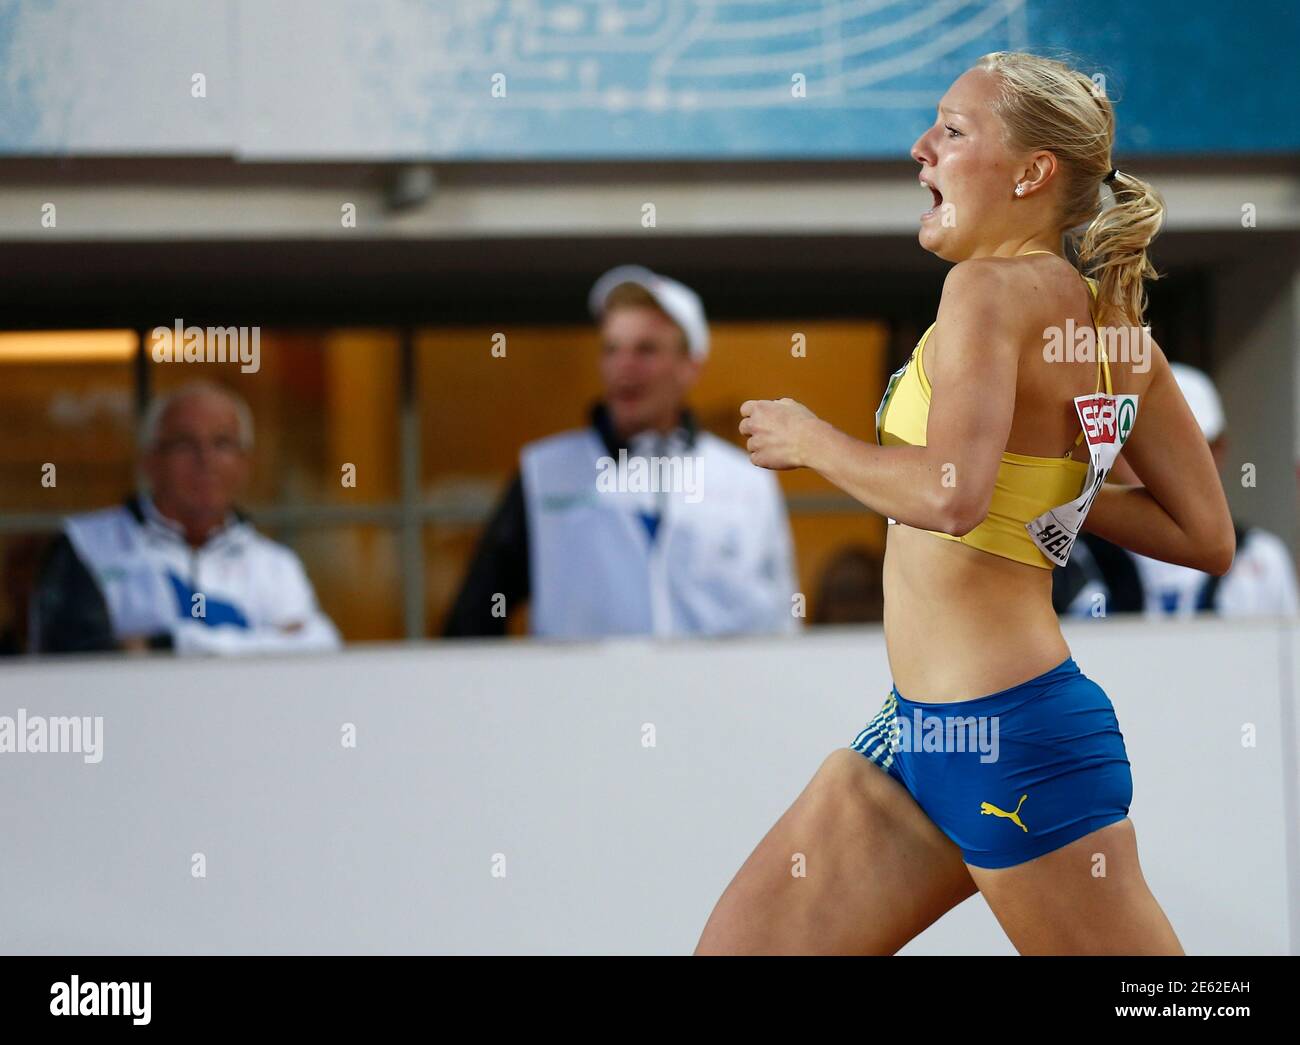 Sweden Finland Athletics High Resolution Stock Photography and Images -  Alamy